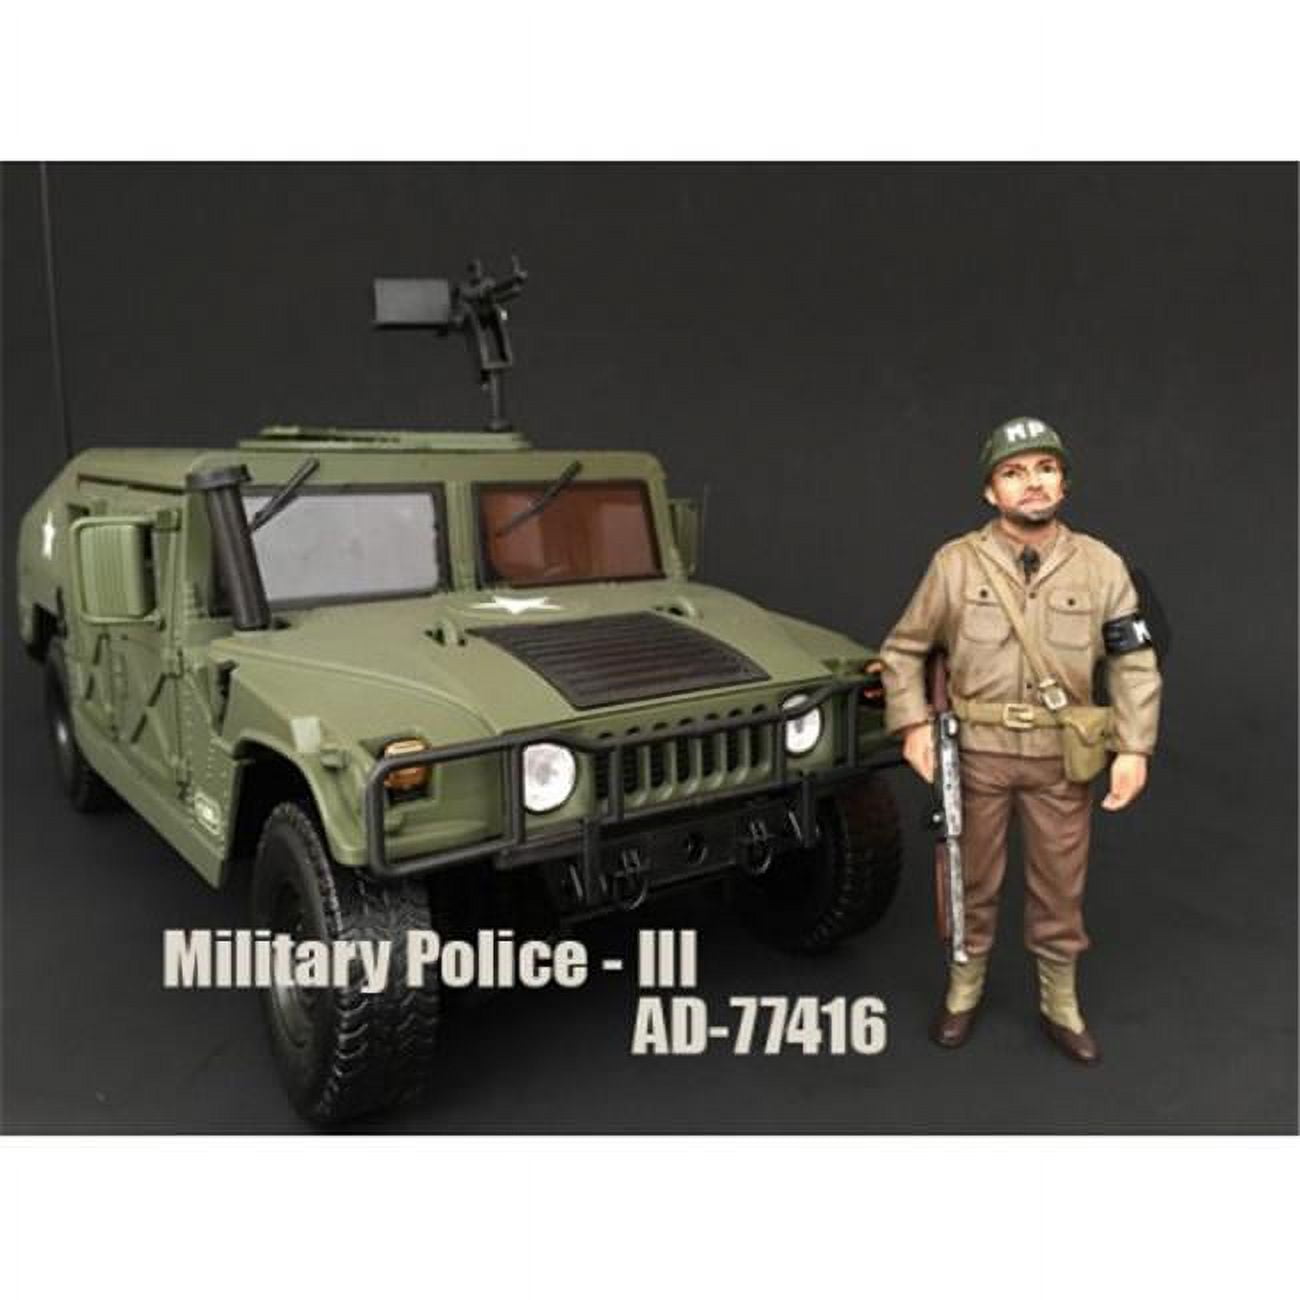 77416 Wwii Military Police Figure Iii For 118 Scale Models